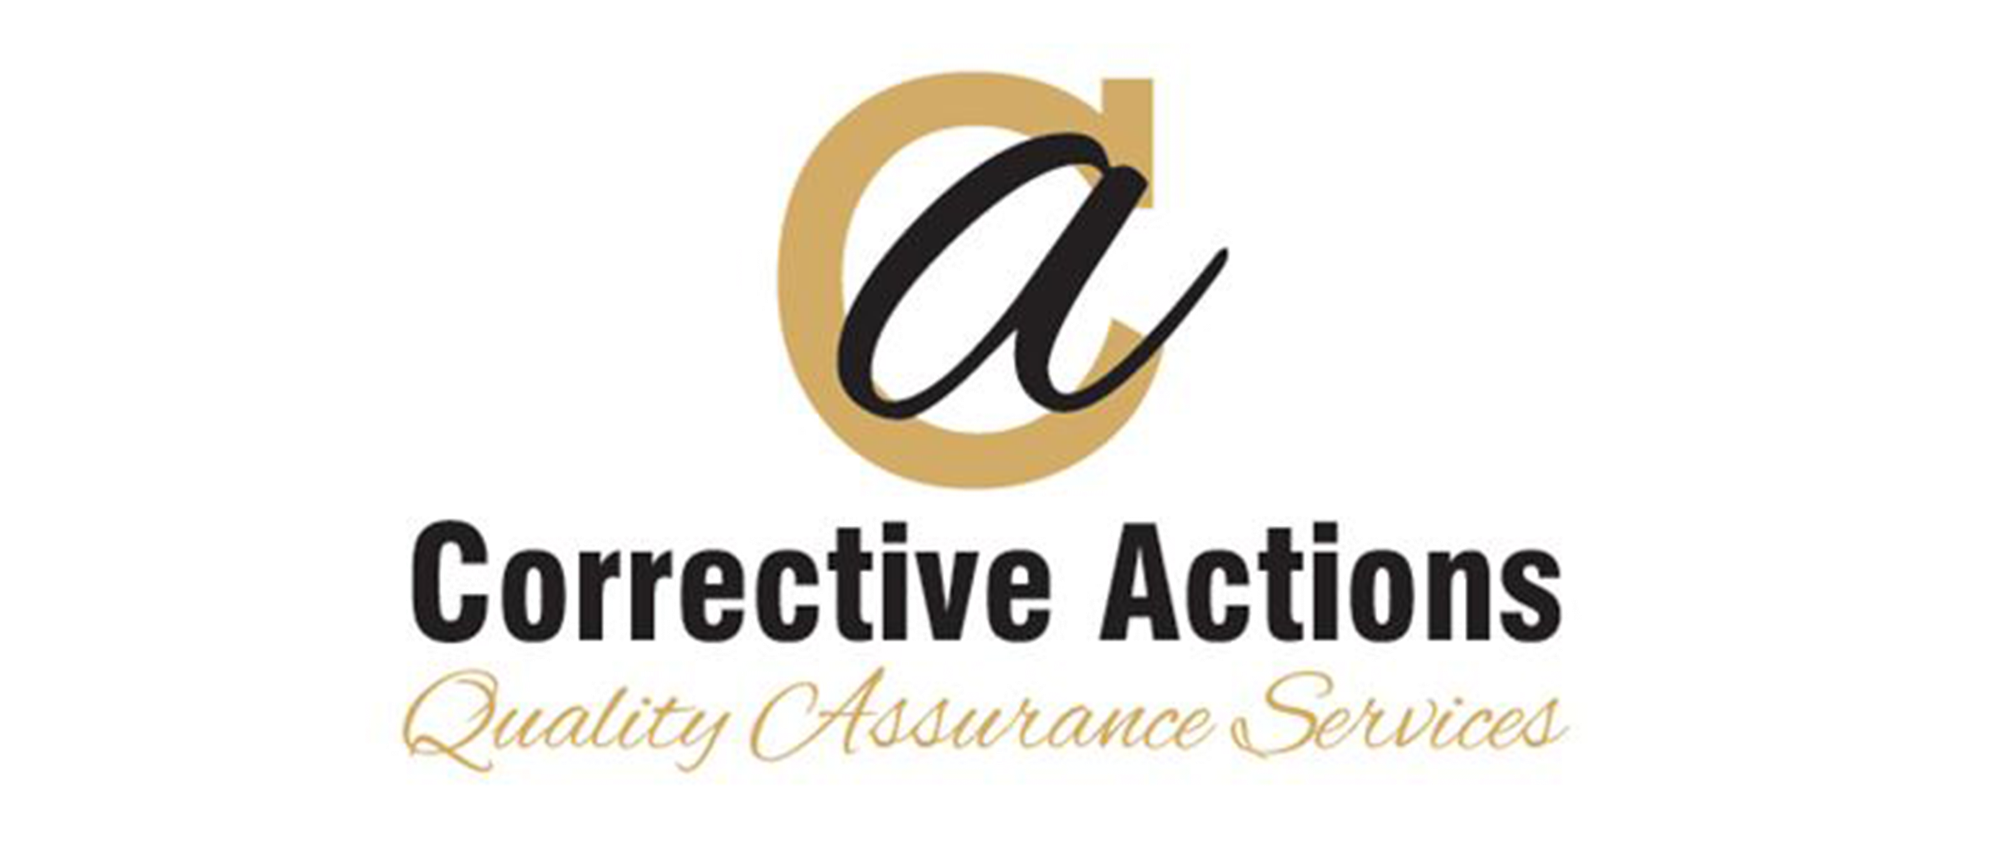 CORRECTIVE ACTIONS